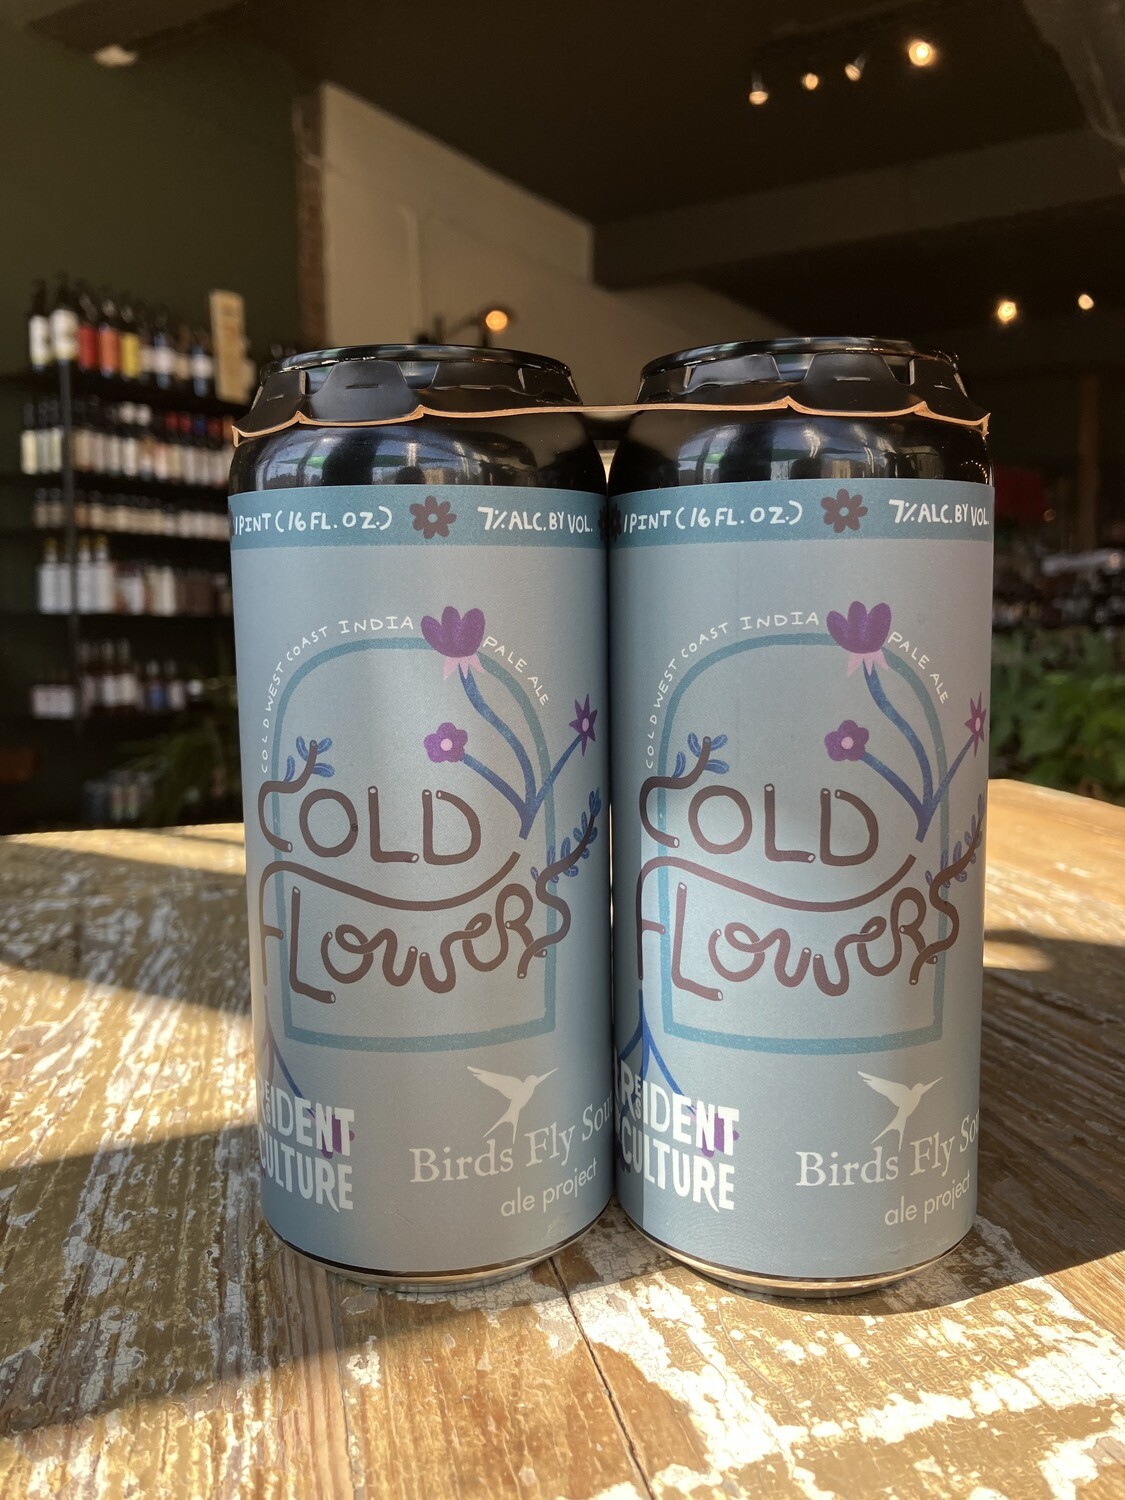 Resident Culture Cold Flowers Cold West Coast IPA